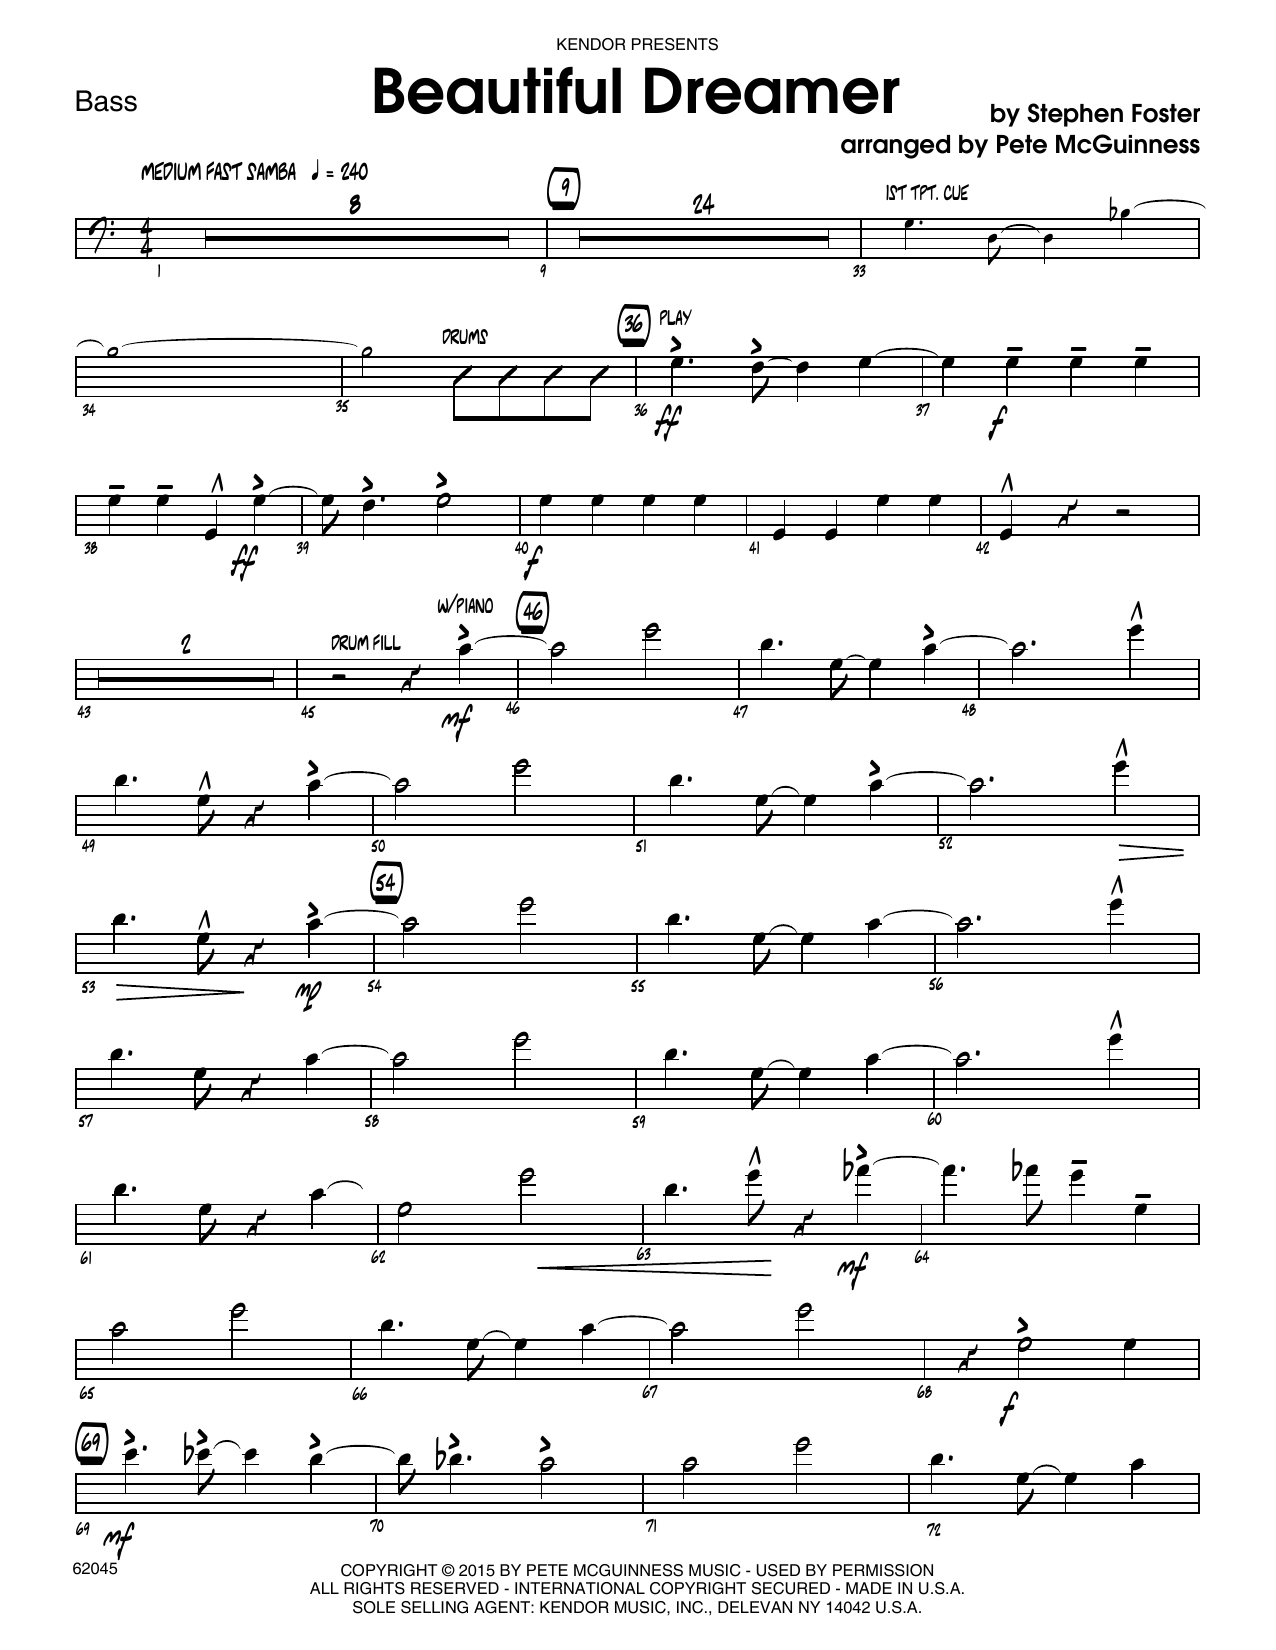 Stephen Foster Beautiful Dreamer - Bass sheet music preview music notes and score for Jazz Ensemble including 7 page(s)